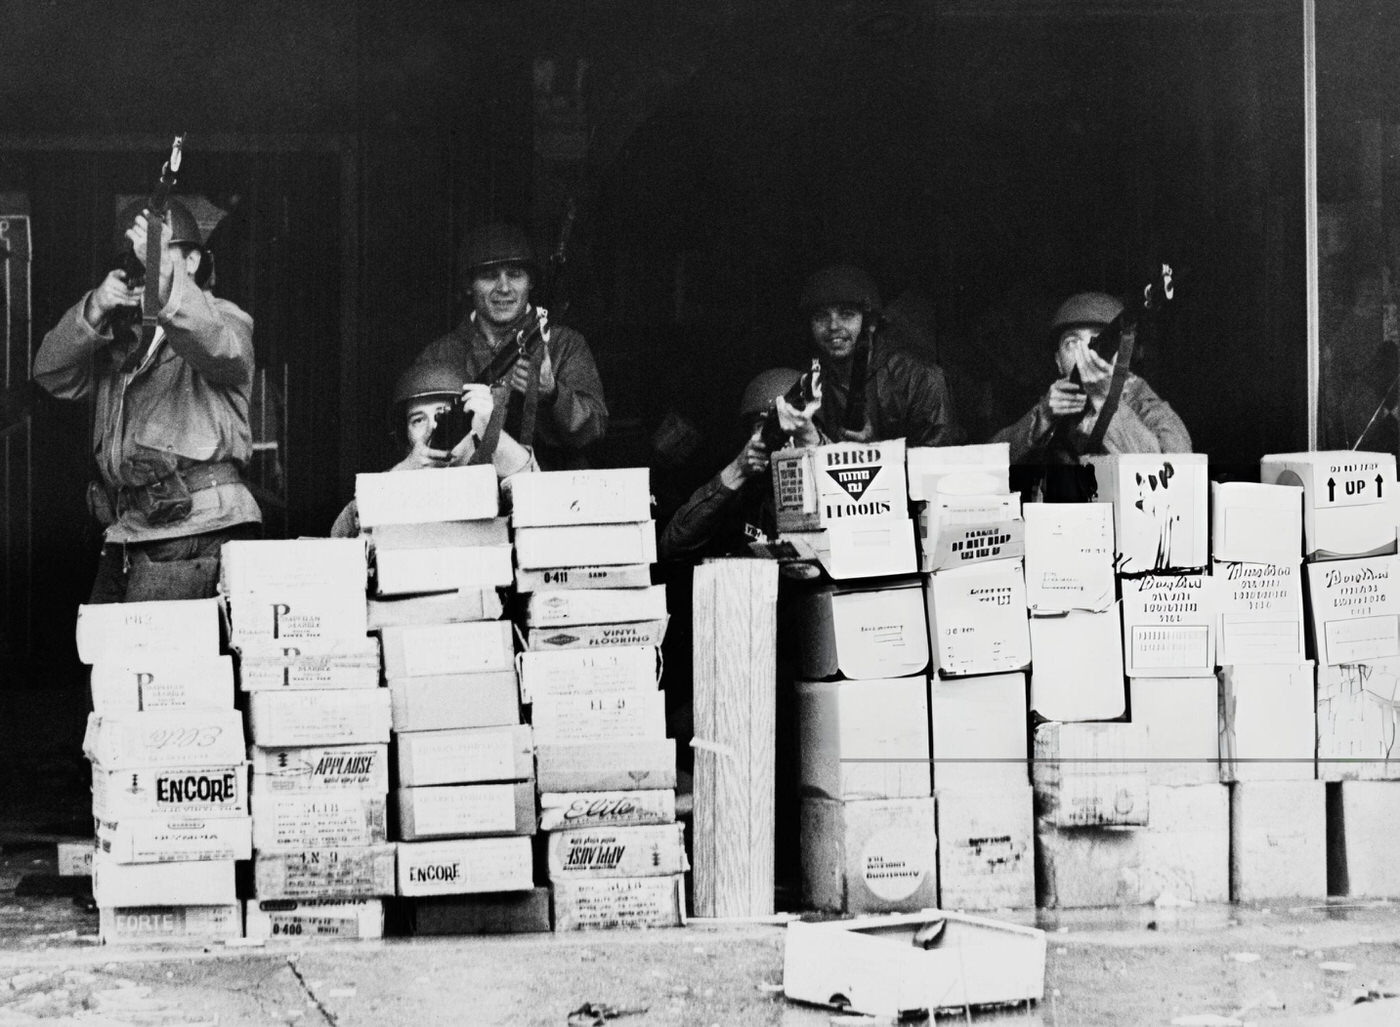 Soldiers of the National Guard shelter behind a stack of boxes